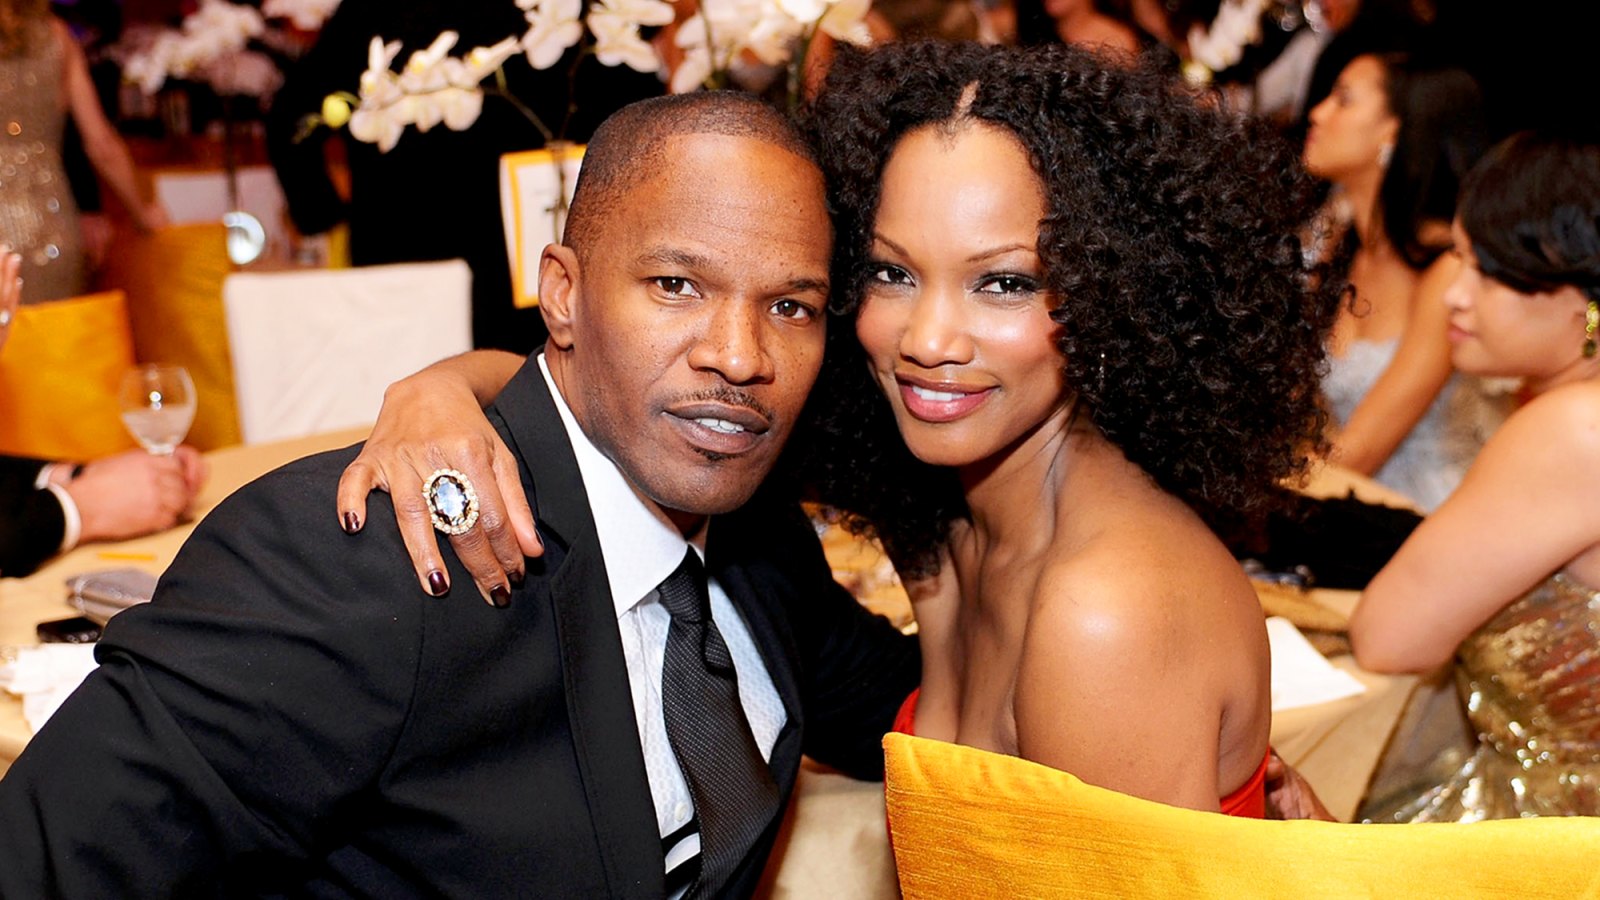 Jamie Foxx and Garcelle Beauvais attend the 19th Annual Elton John AIDS Foundation Academy Awards Viewing Party at the Pacific Design Center in West Hollywood, California.